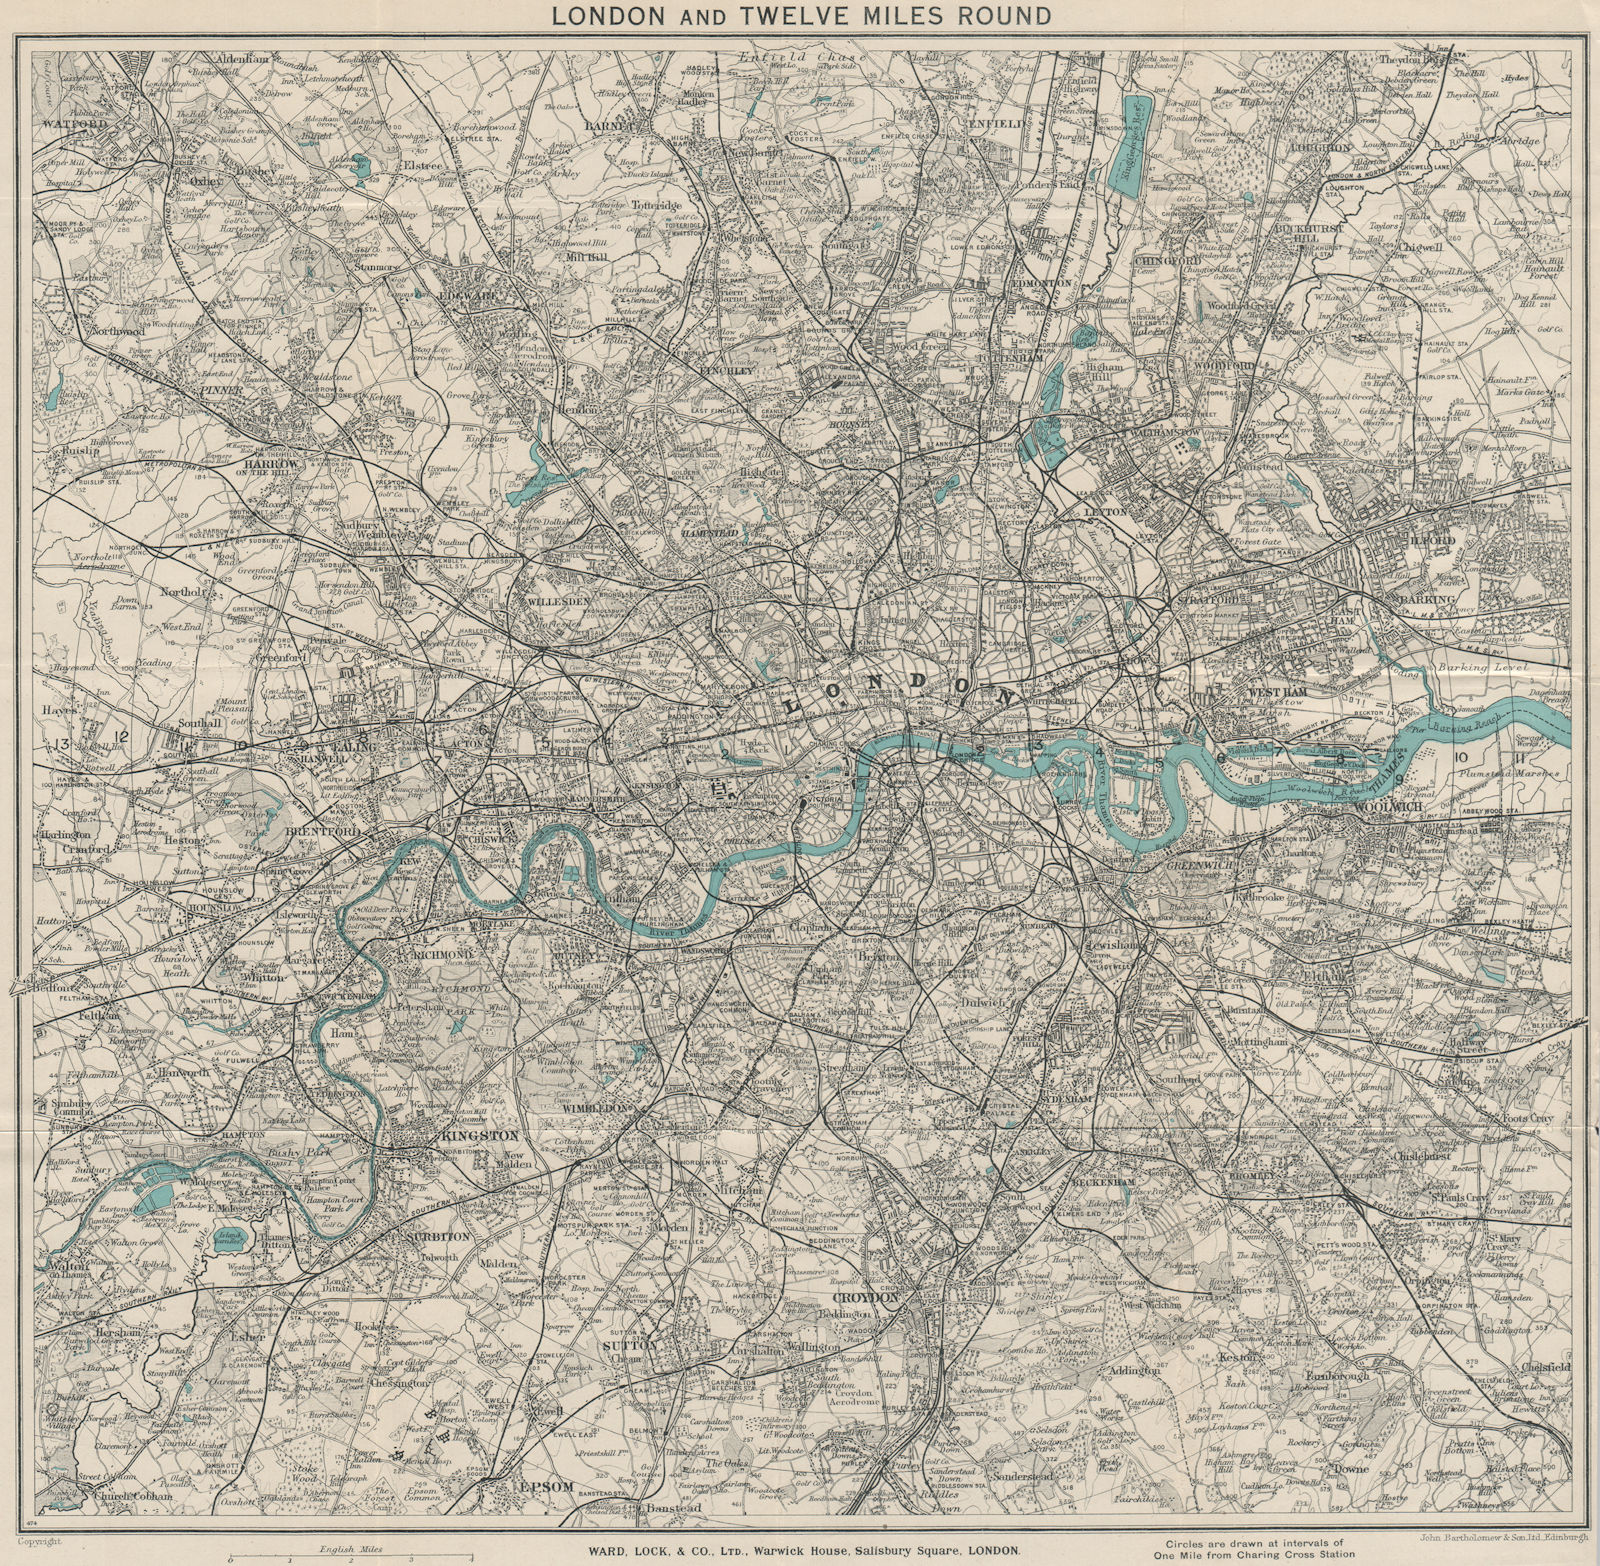 Associate Product 'LONDON AND TWELVE MILES ROUND'. Greater London. WARD LOCK 1933 old map